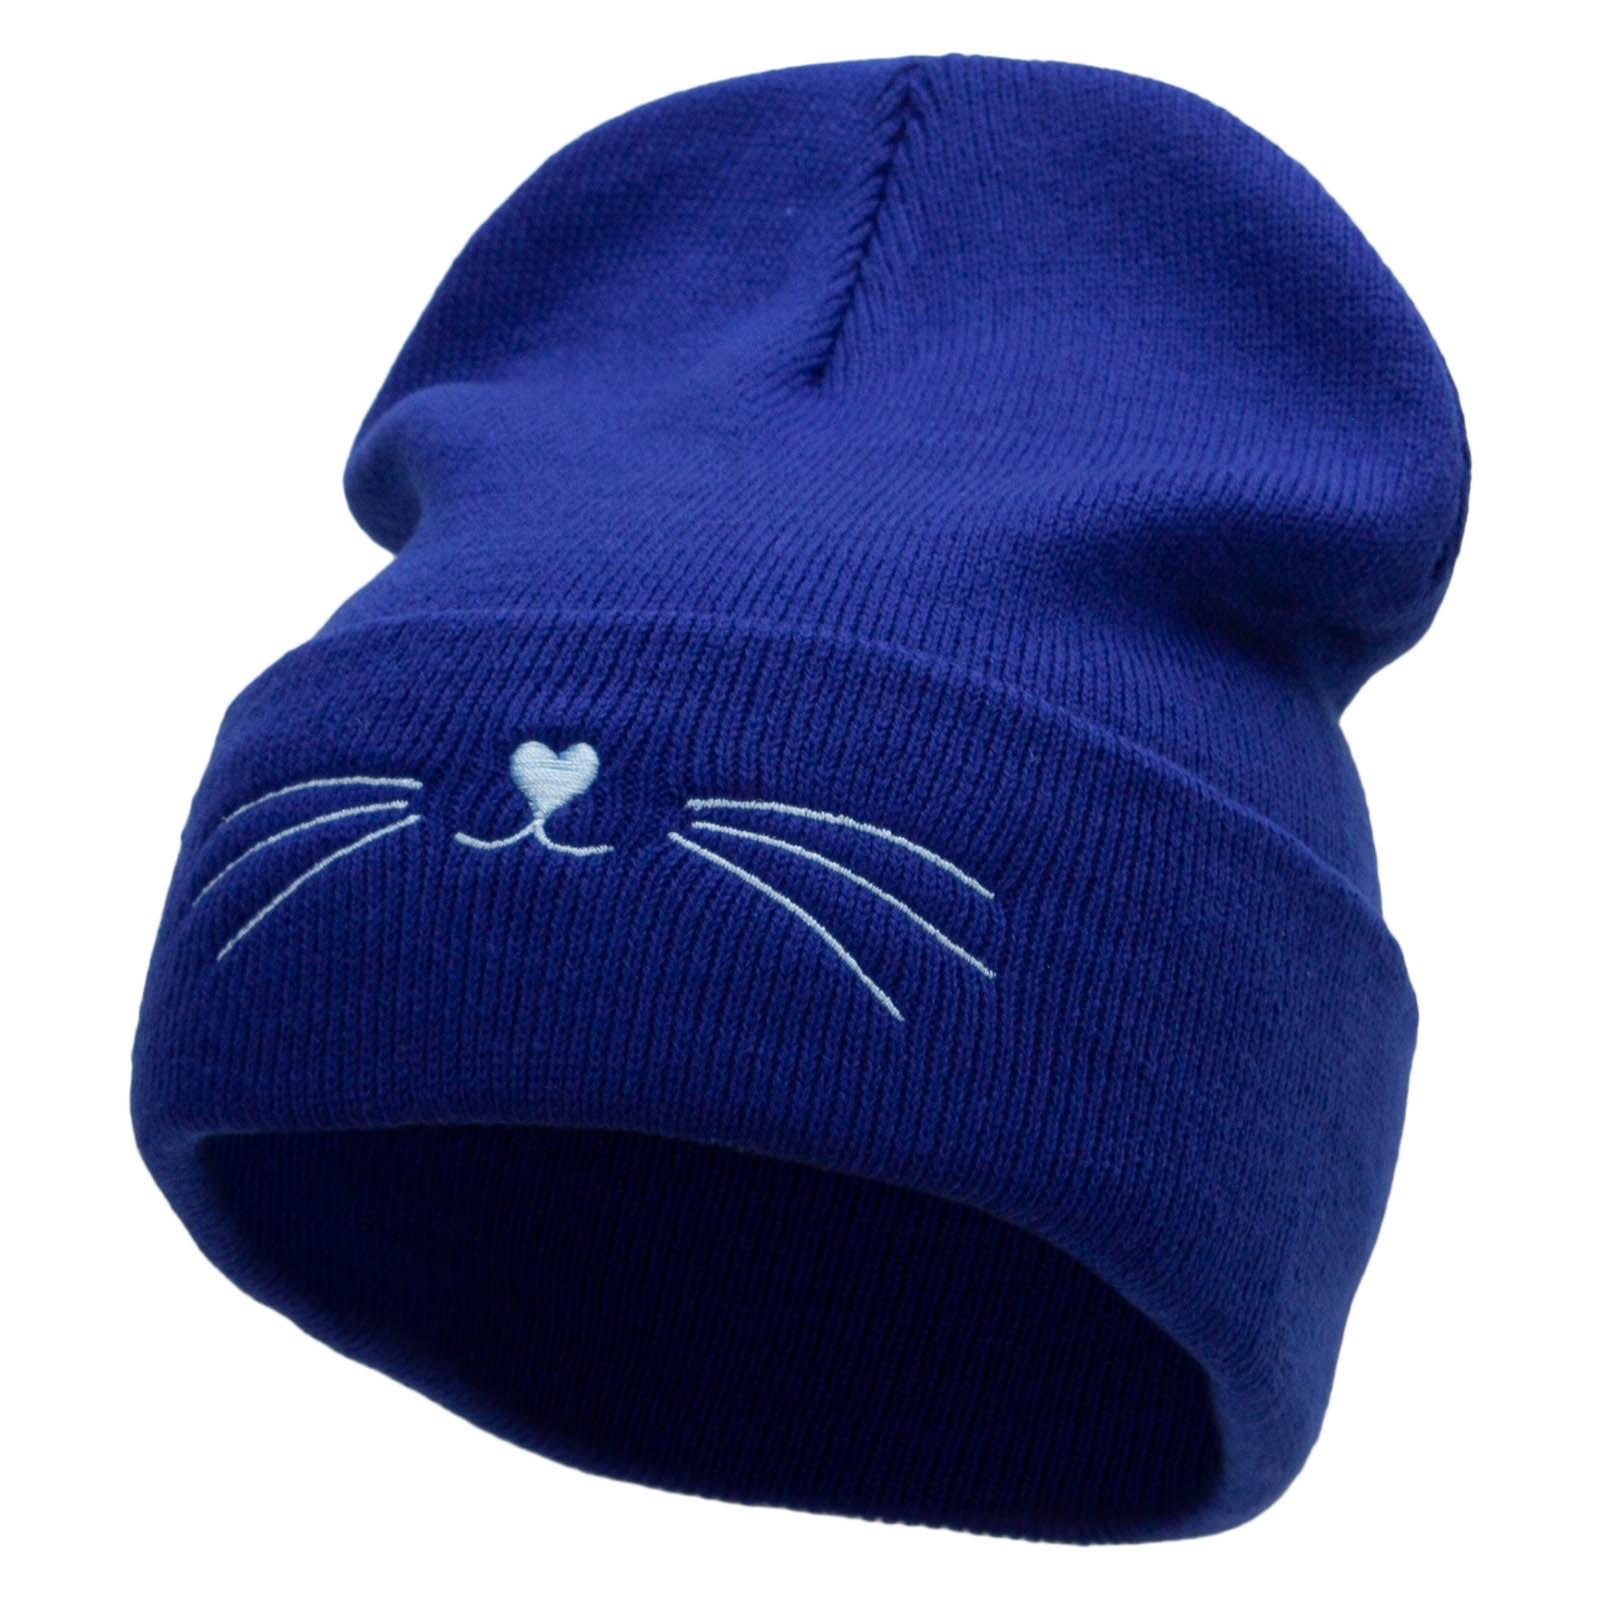 Kitty Cat Embroidered 12 Inch Long Knitted Beanie - Royal OSFM